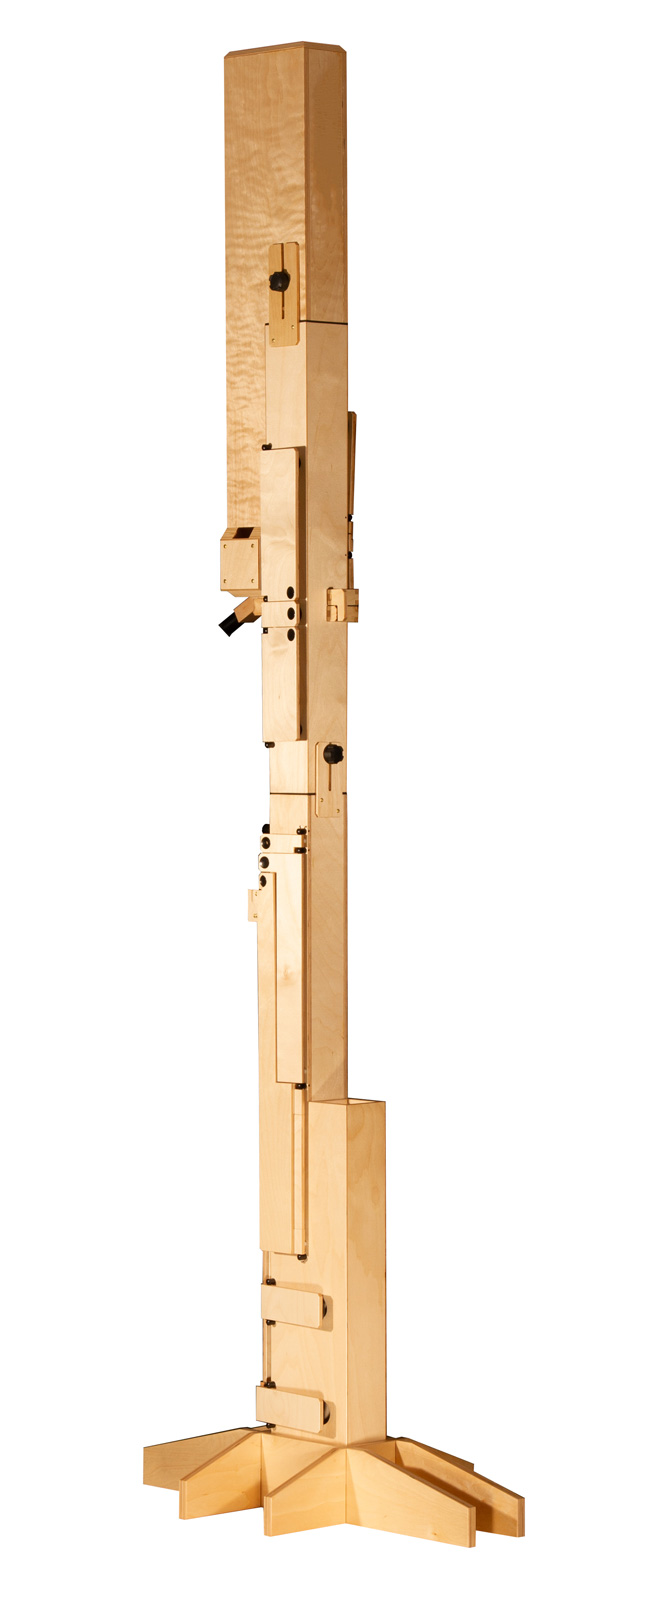 Paetzold by Kunath, subcontrabass in F, "Master", "HP Original", 442 Hz, natural, birch plywood